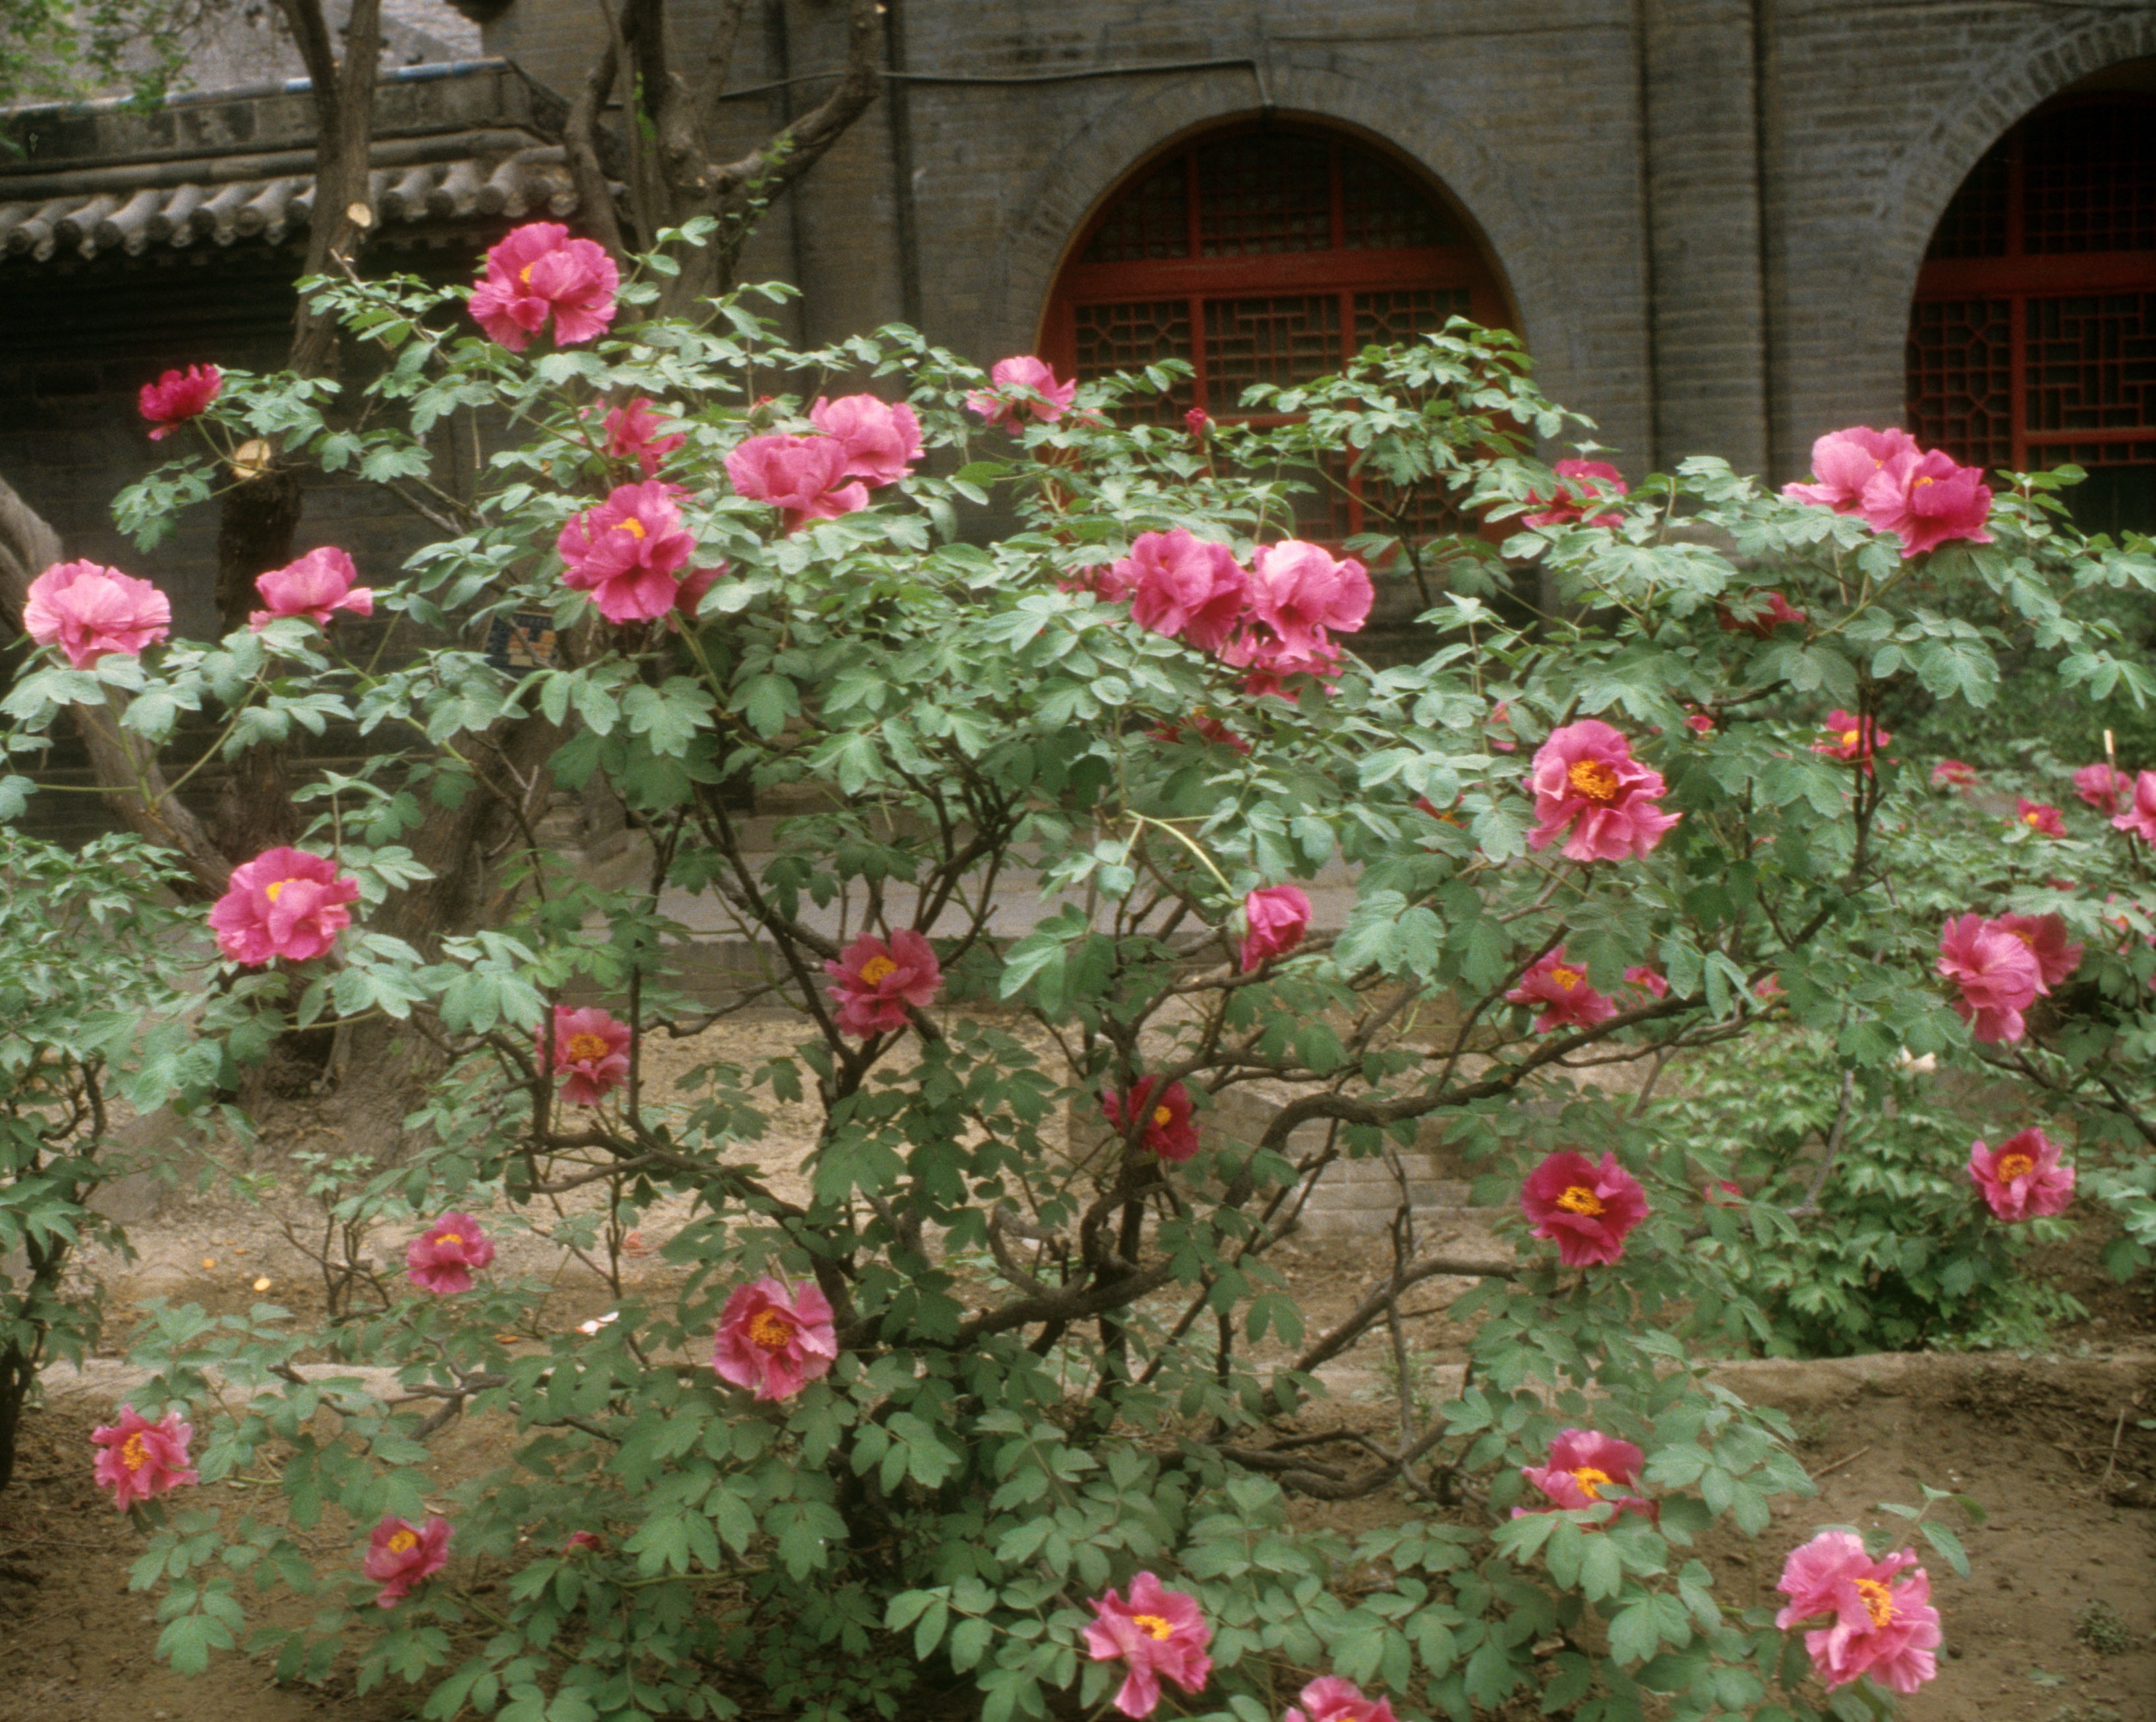 The 400 year old tree peonies of Taiyuan | crickethillgarden